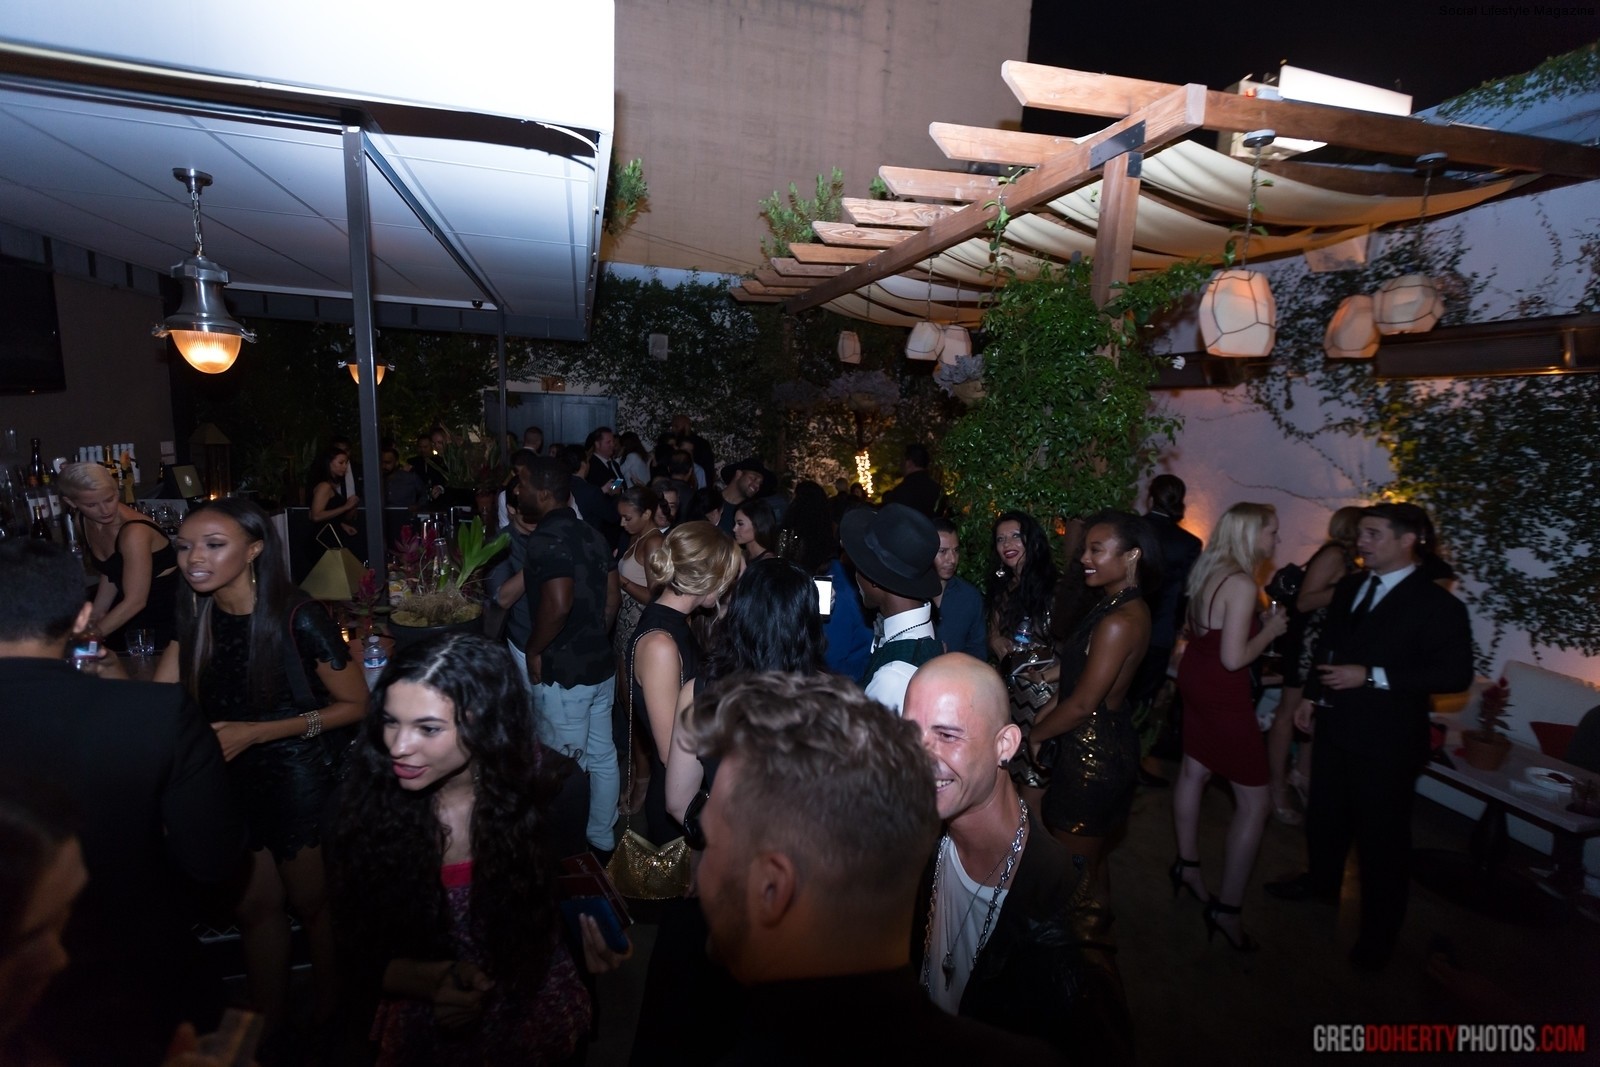 Socal-lifestyle-Magazine-launch-party-2125-X3-1